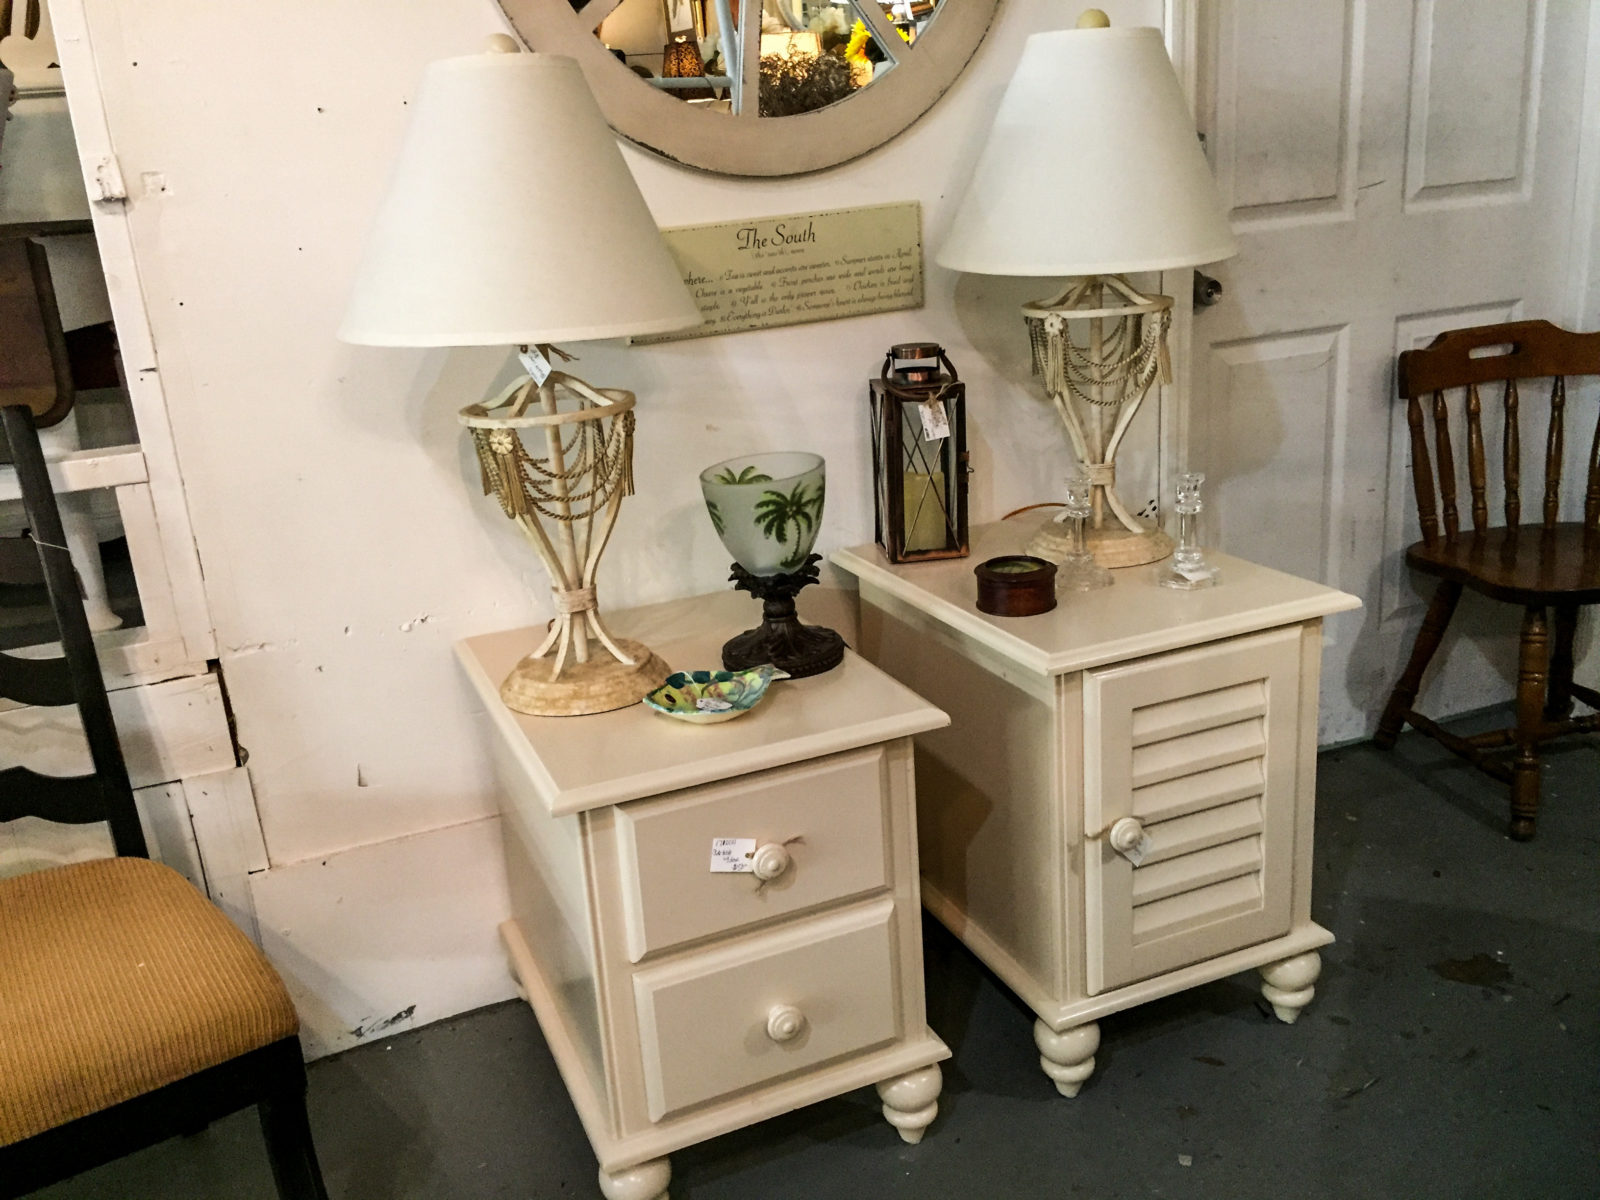 Beautiful Off White Side Tables • Table w/2 drawers measures 24"x28"x23". The Lamps came from the same household and coordinate well. All are in excellent used condition.
**Please nite that the table with the door has been sold-all other items available.**
Come see in person!